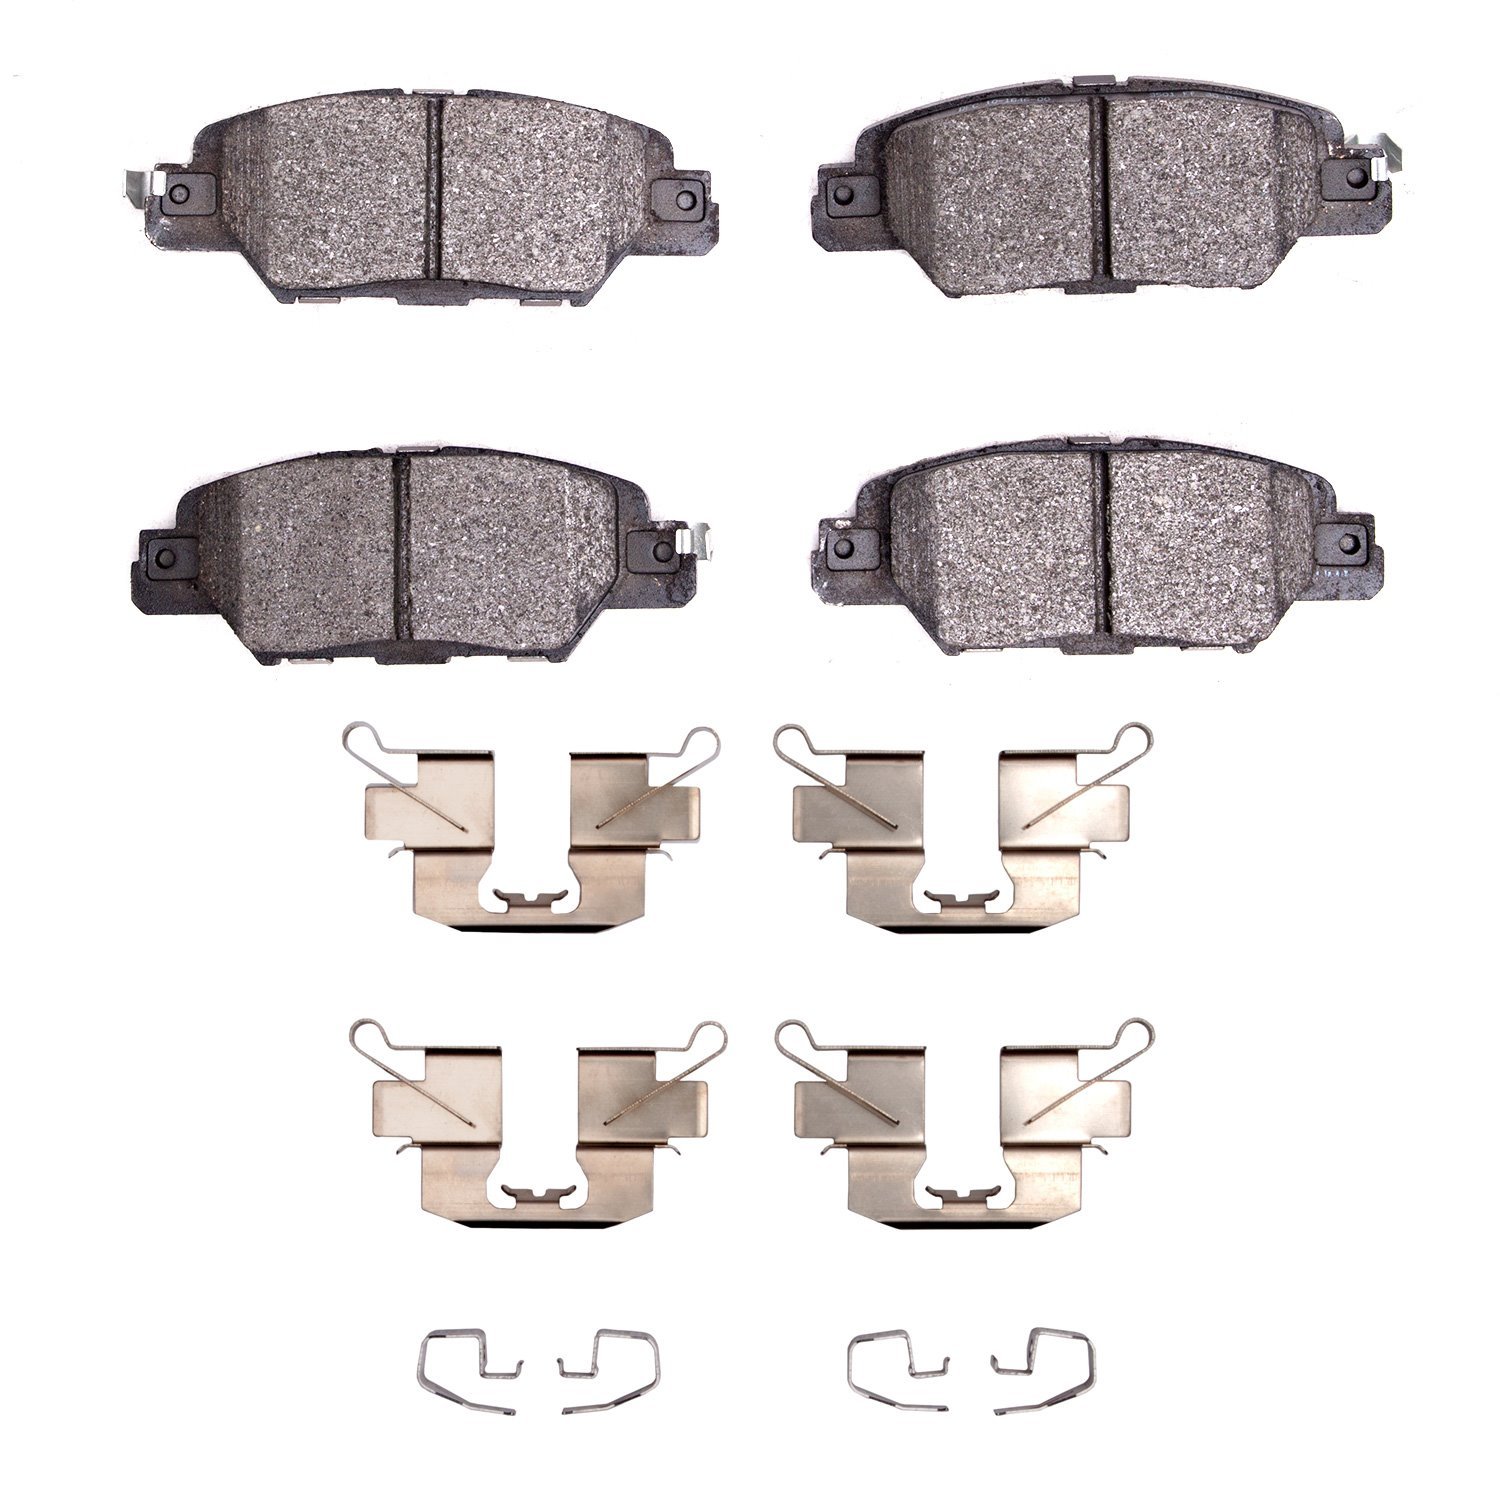 1310-1846-01 3000-Series Ceramic Brake Pads & Hardware Kit, Fits Select Ford/Lincoln/Mercury/Mazda, Position: Rear